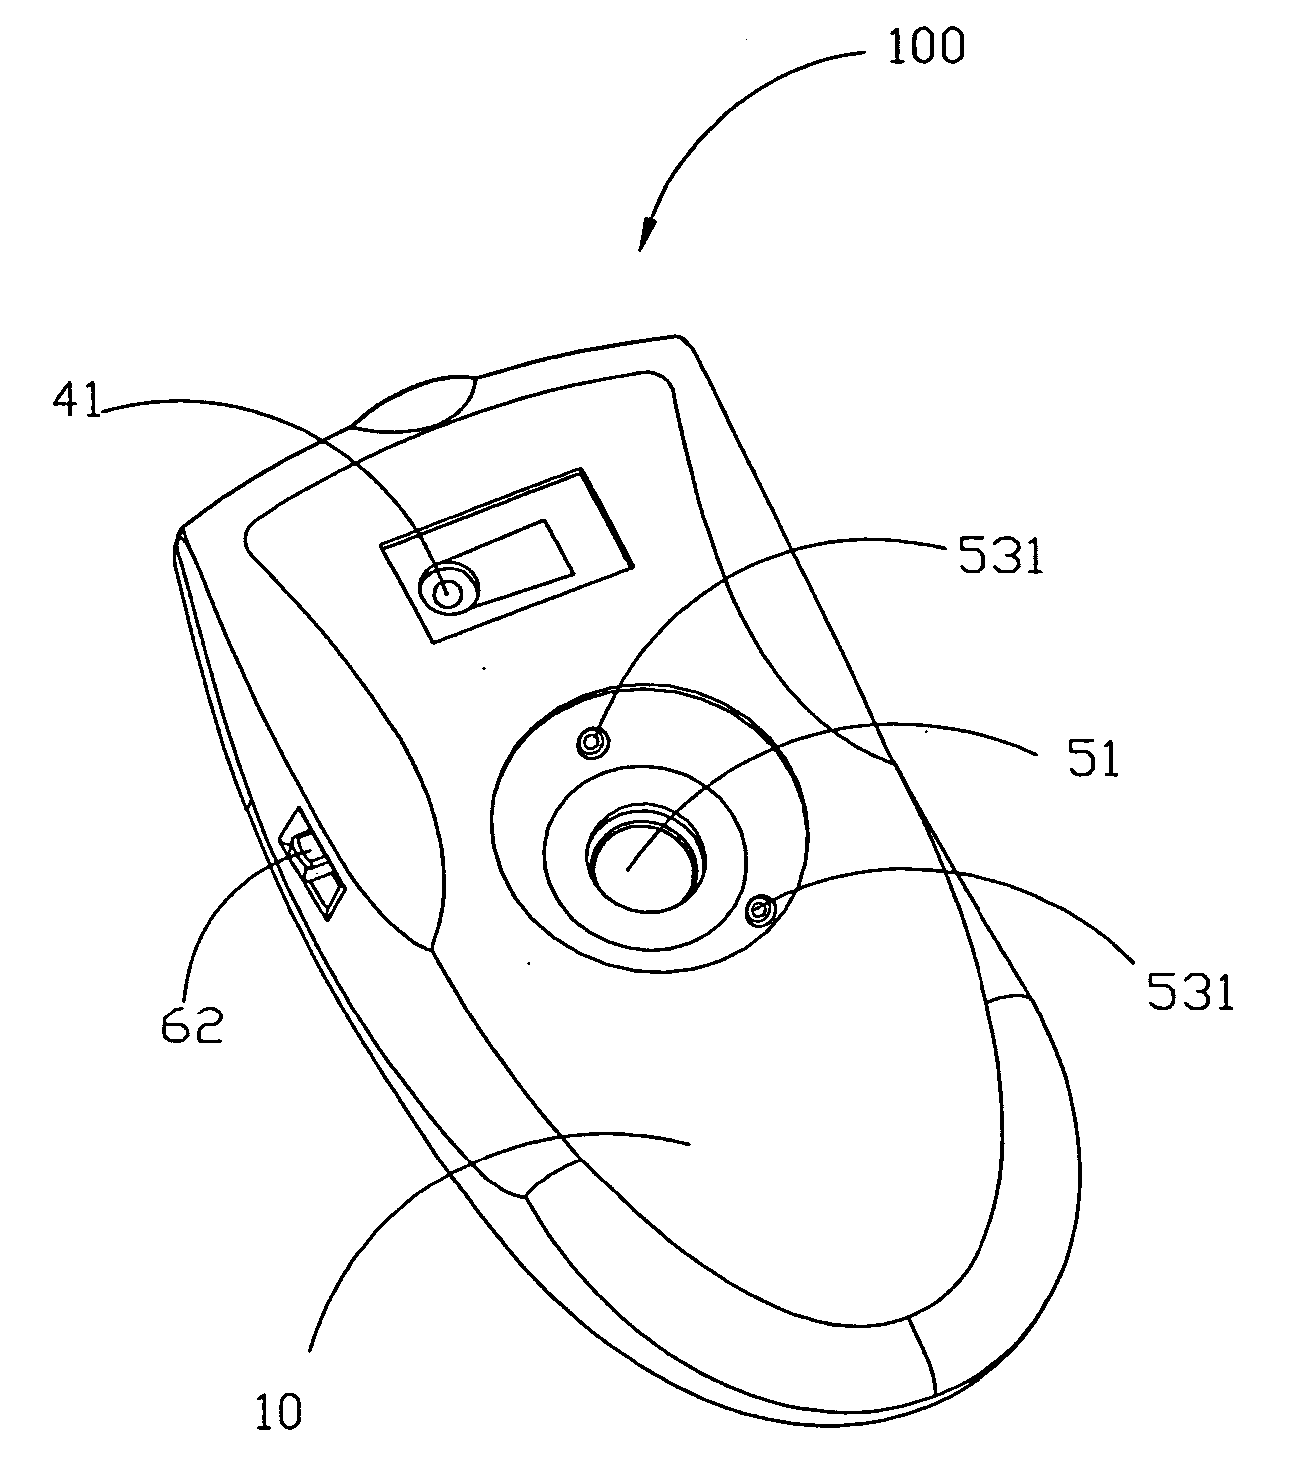 Mouse with image system and method for using the same